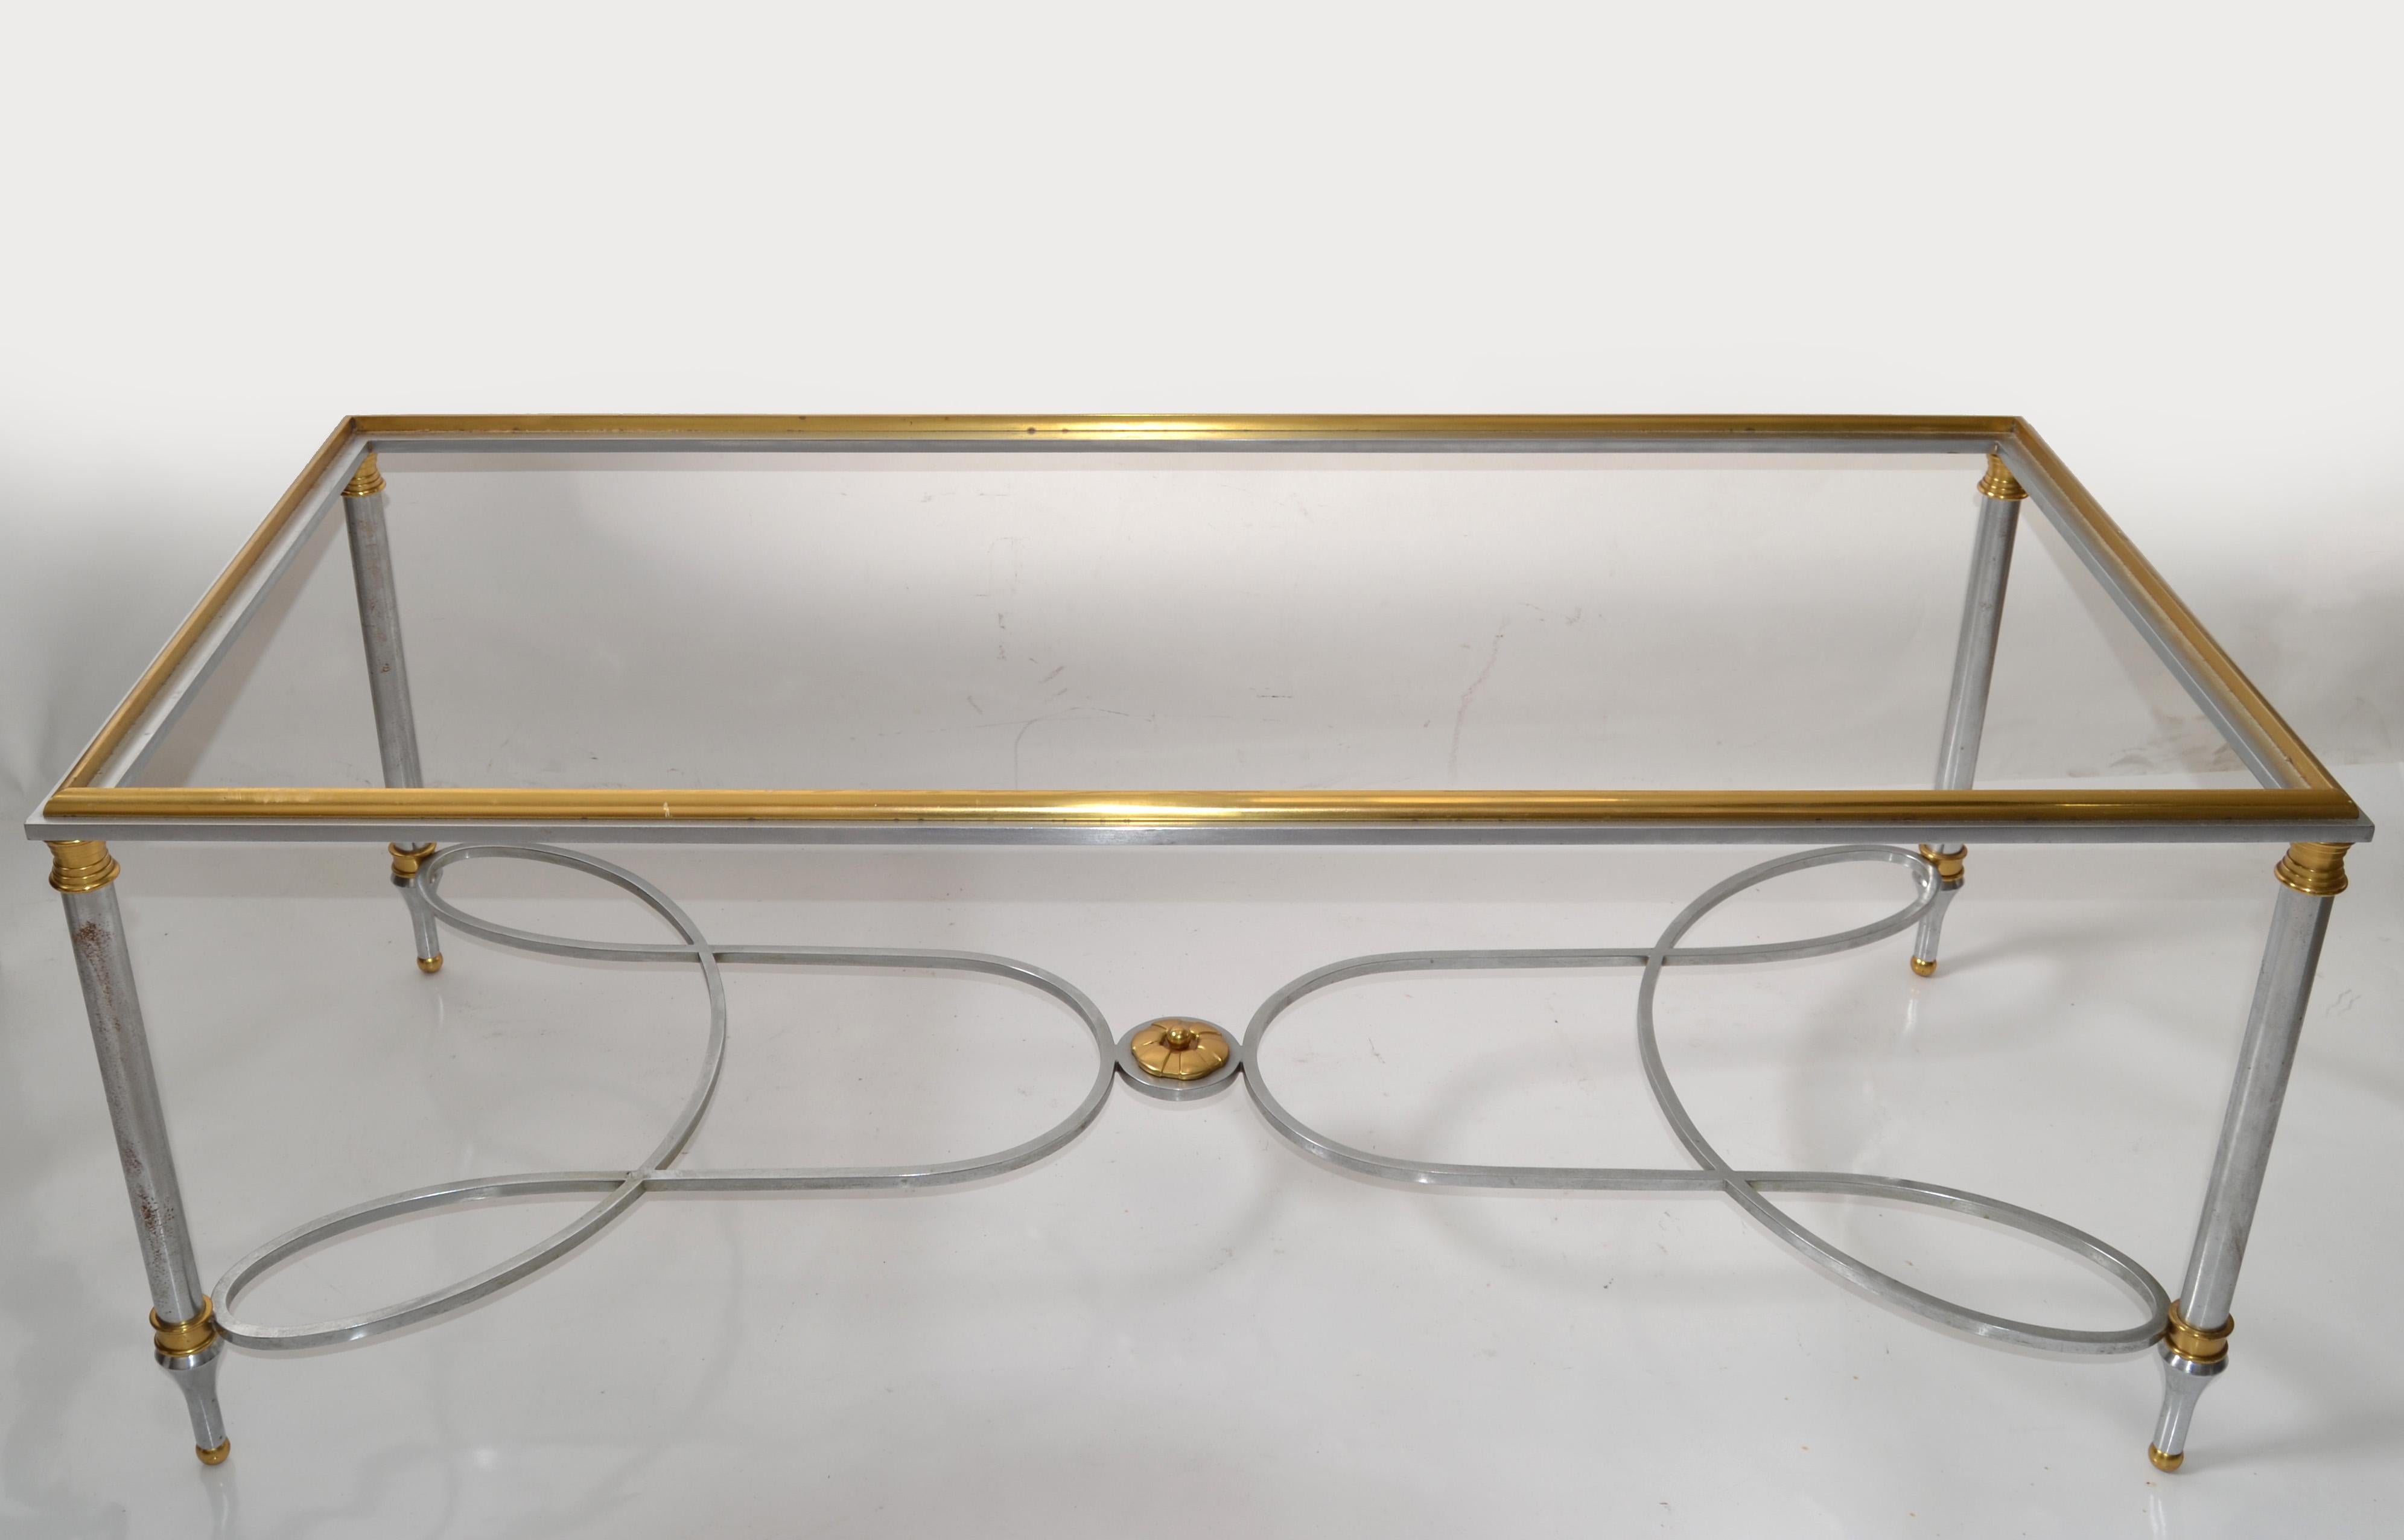 Polished 1970s Maison Charles French Steel Brass Glass Coffee Table Mid-Century Modern 